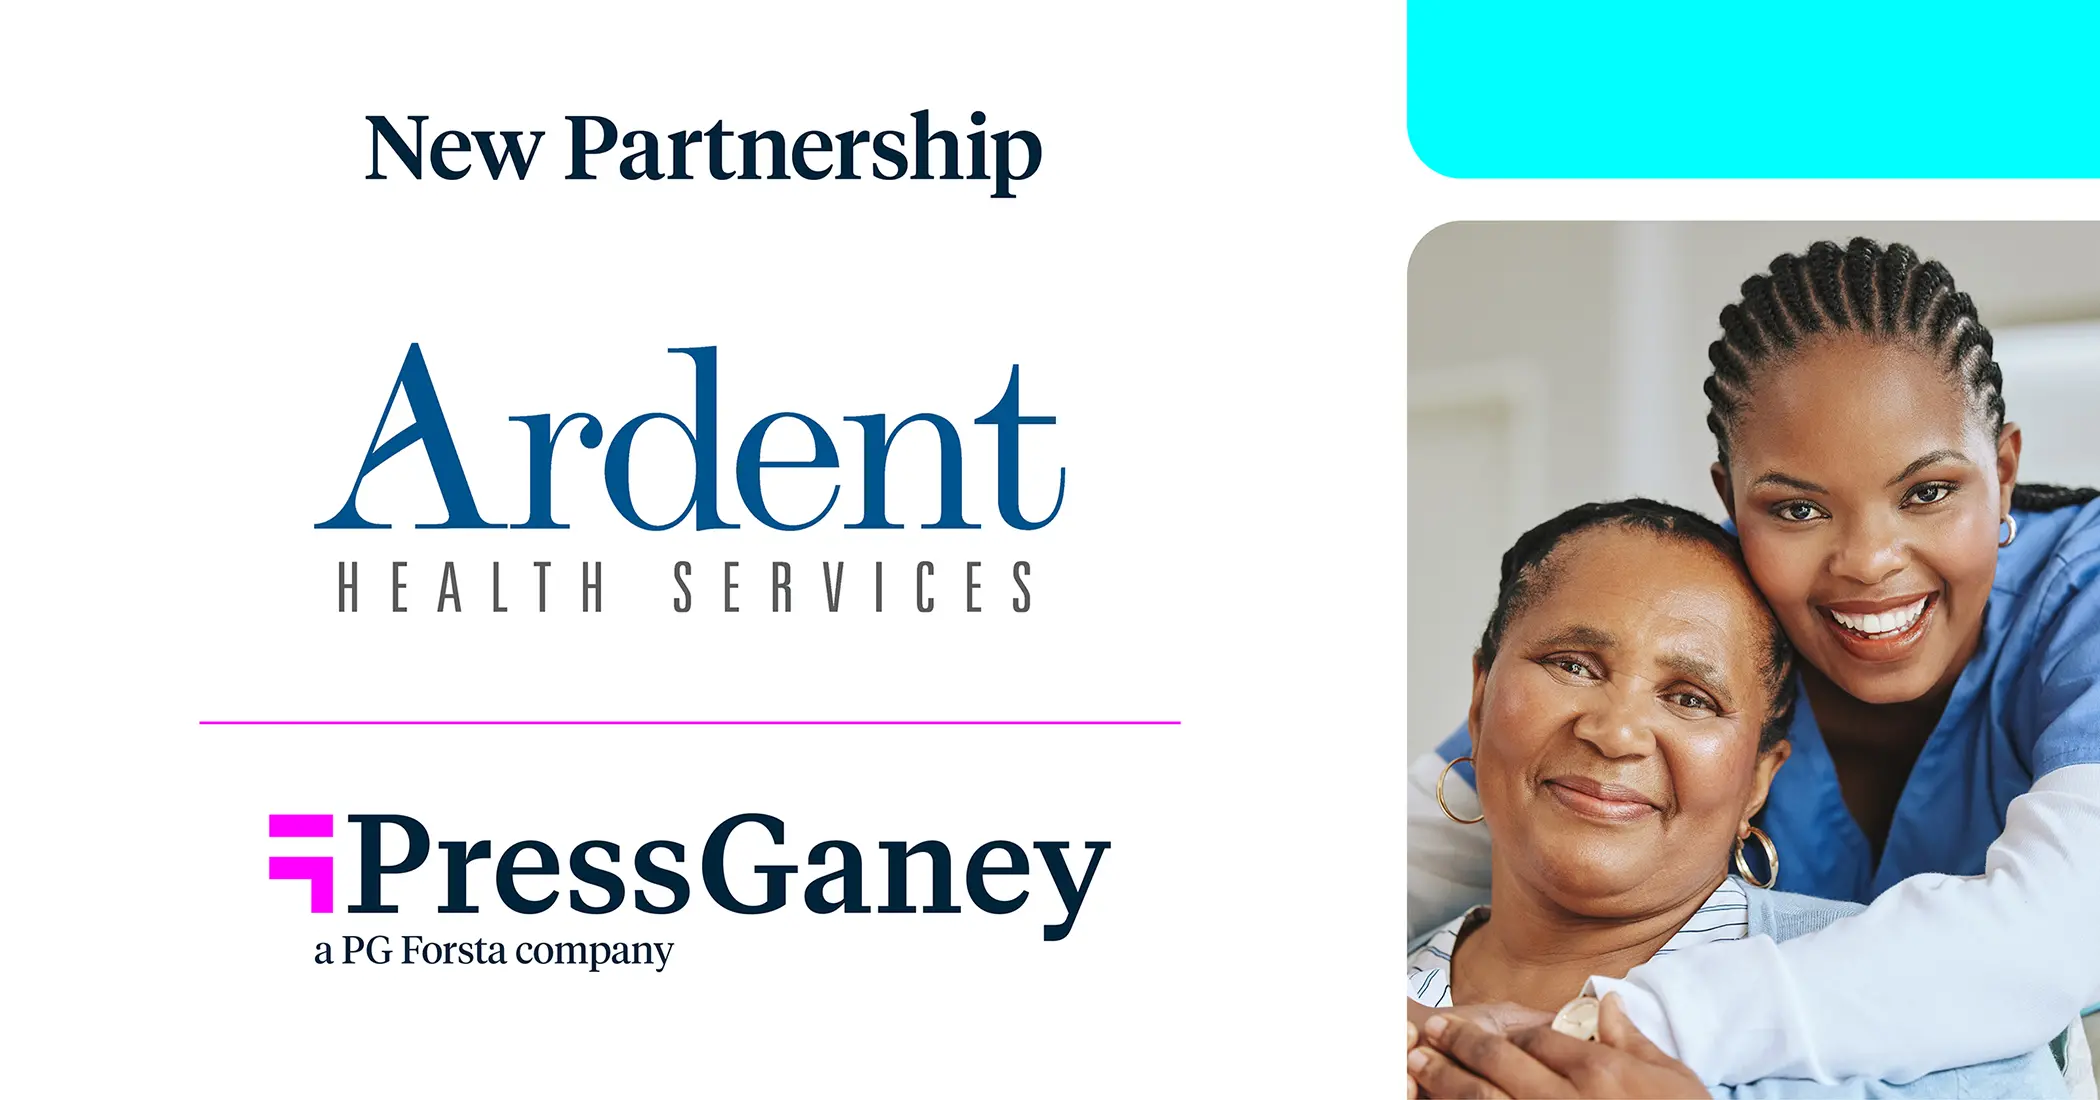 Press Ganey and Ardent Health Services announce partnership to improve the Human Experience in healthcare and move the needle toward zero harm